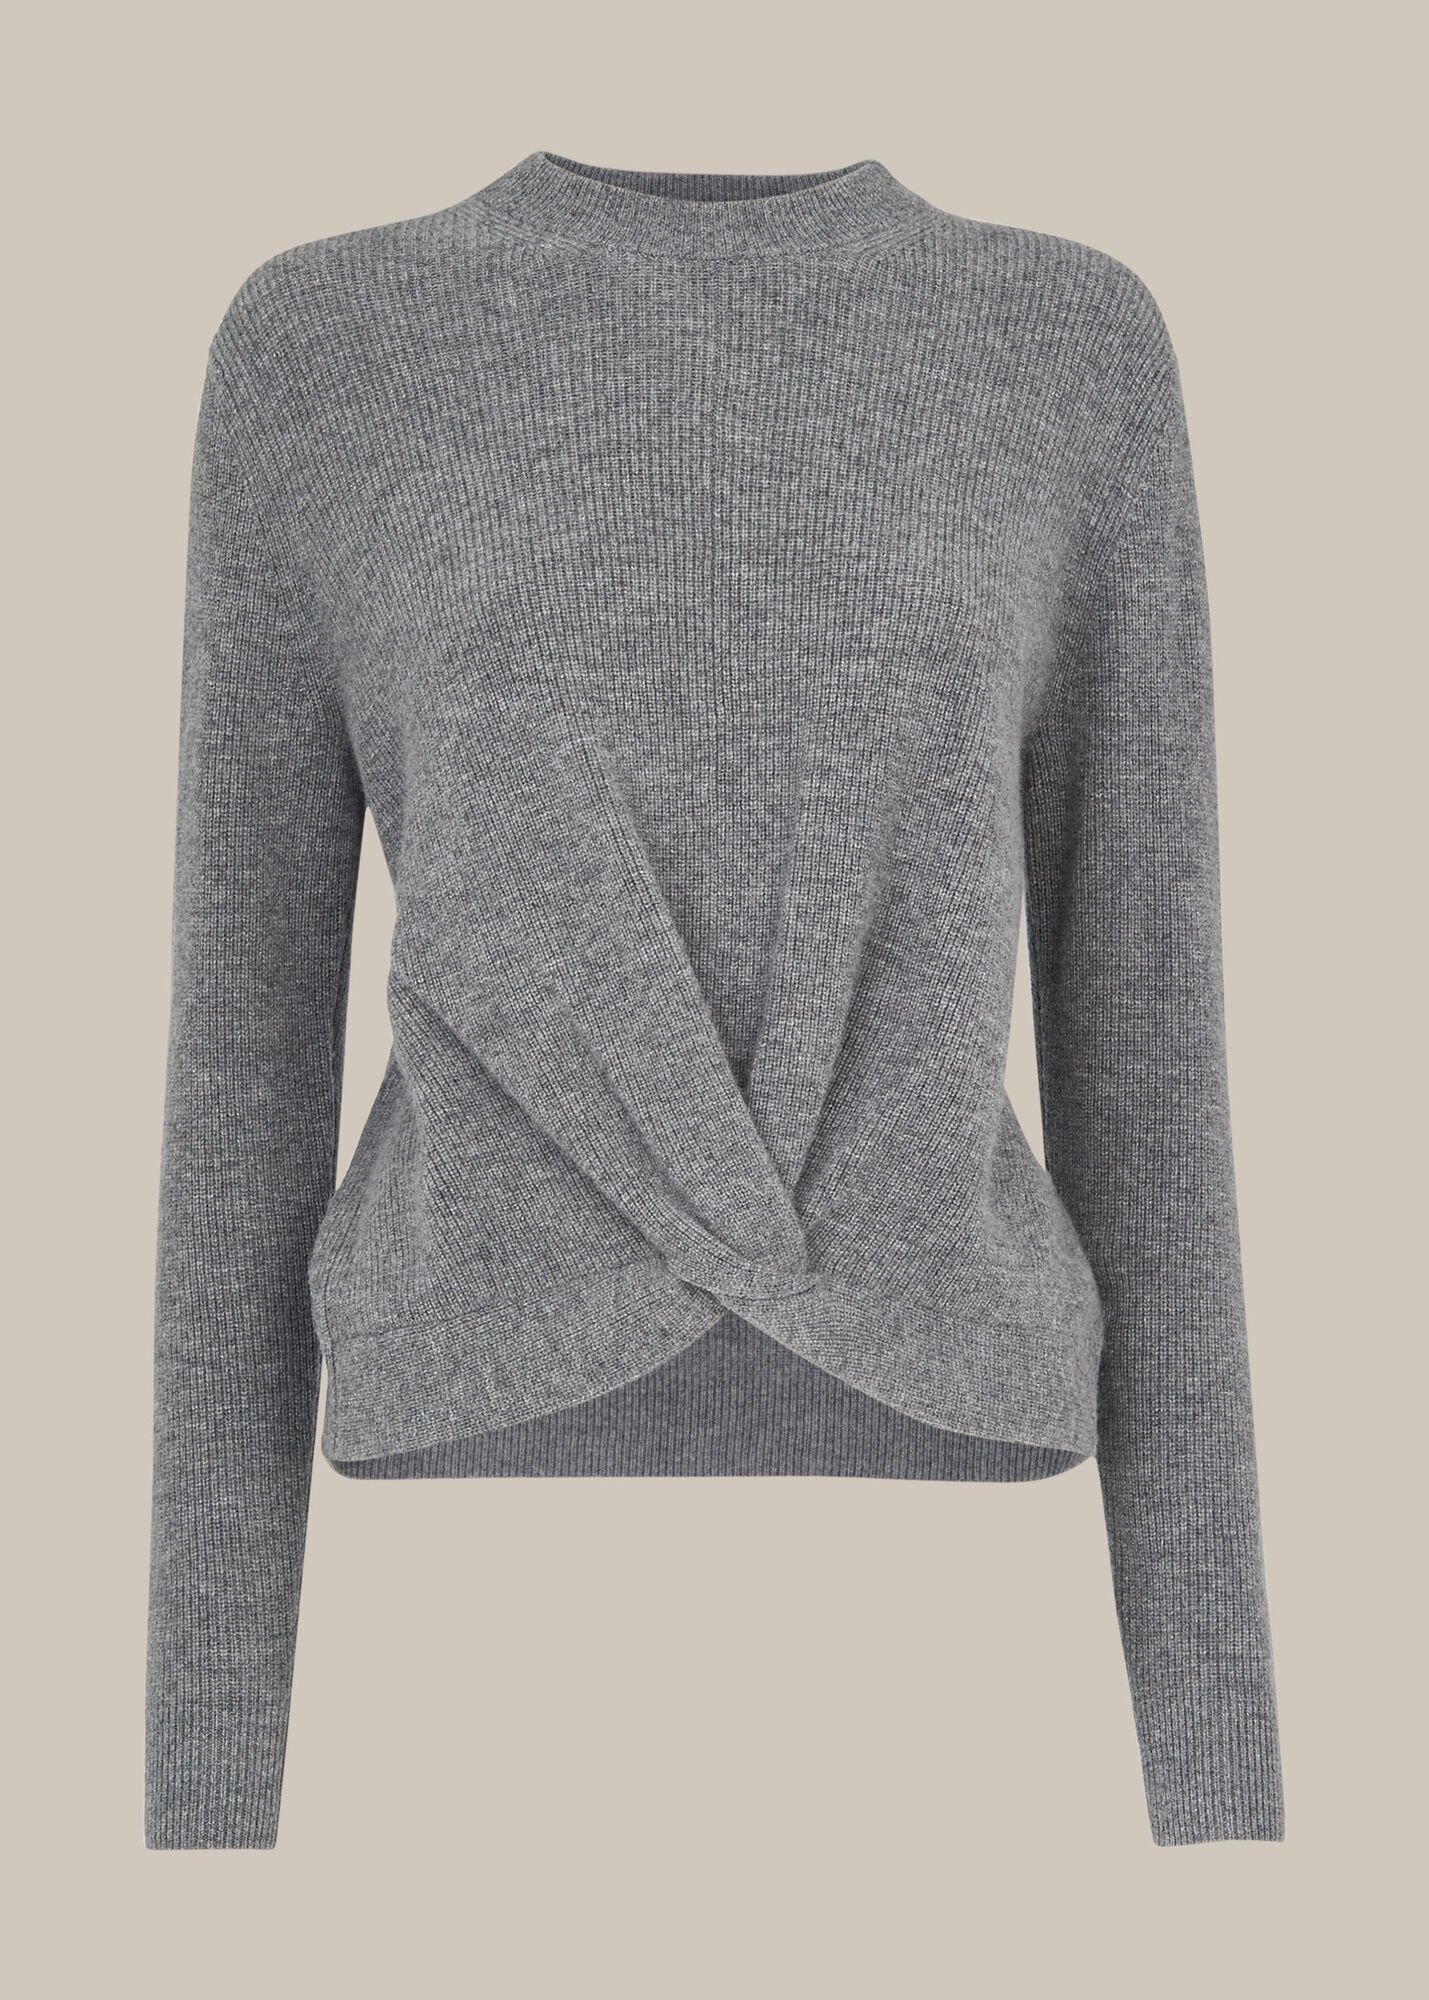 Grey Twist Front Wool Cashmere Knit | WHISTLES